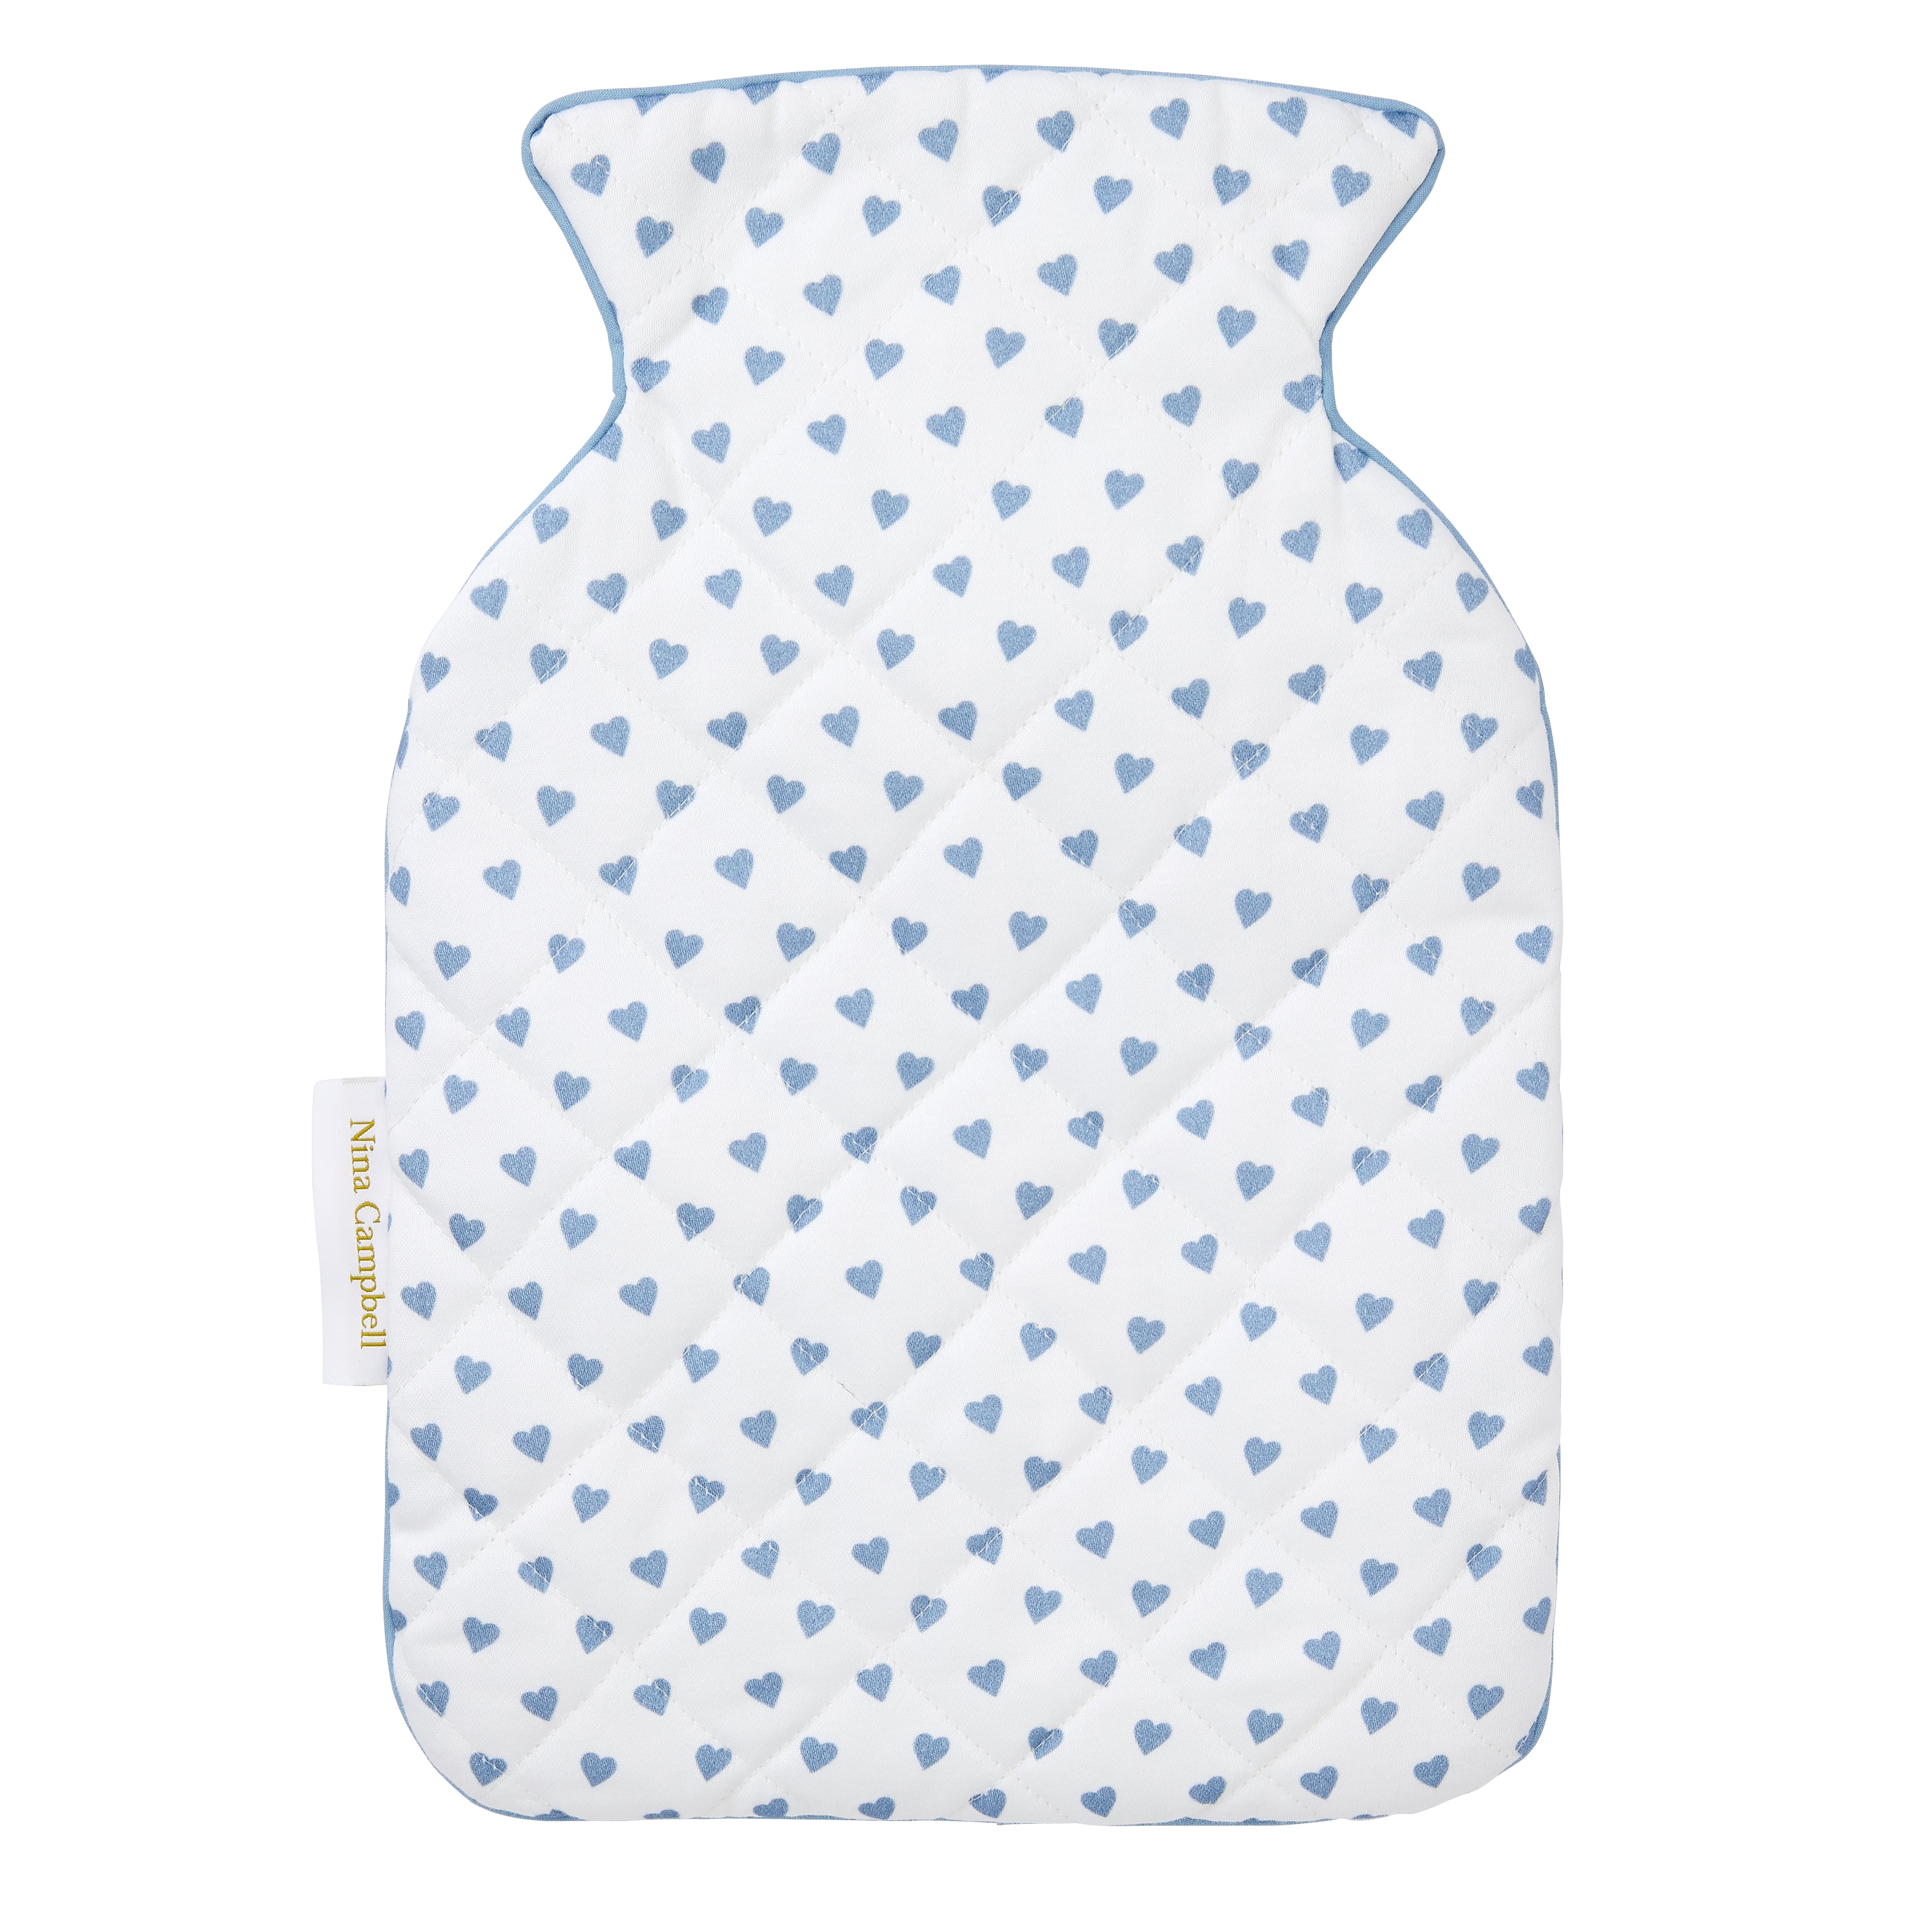 Nina Campbell Hot Water Bottle Cover - Heart Blue